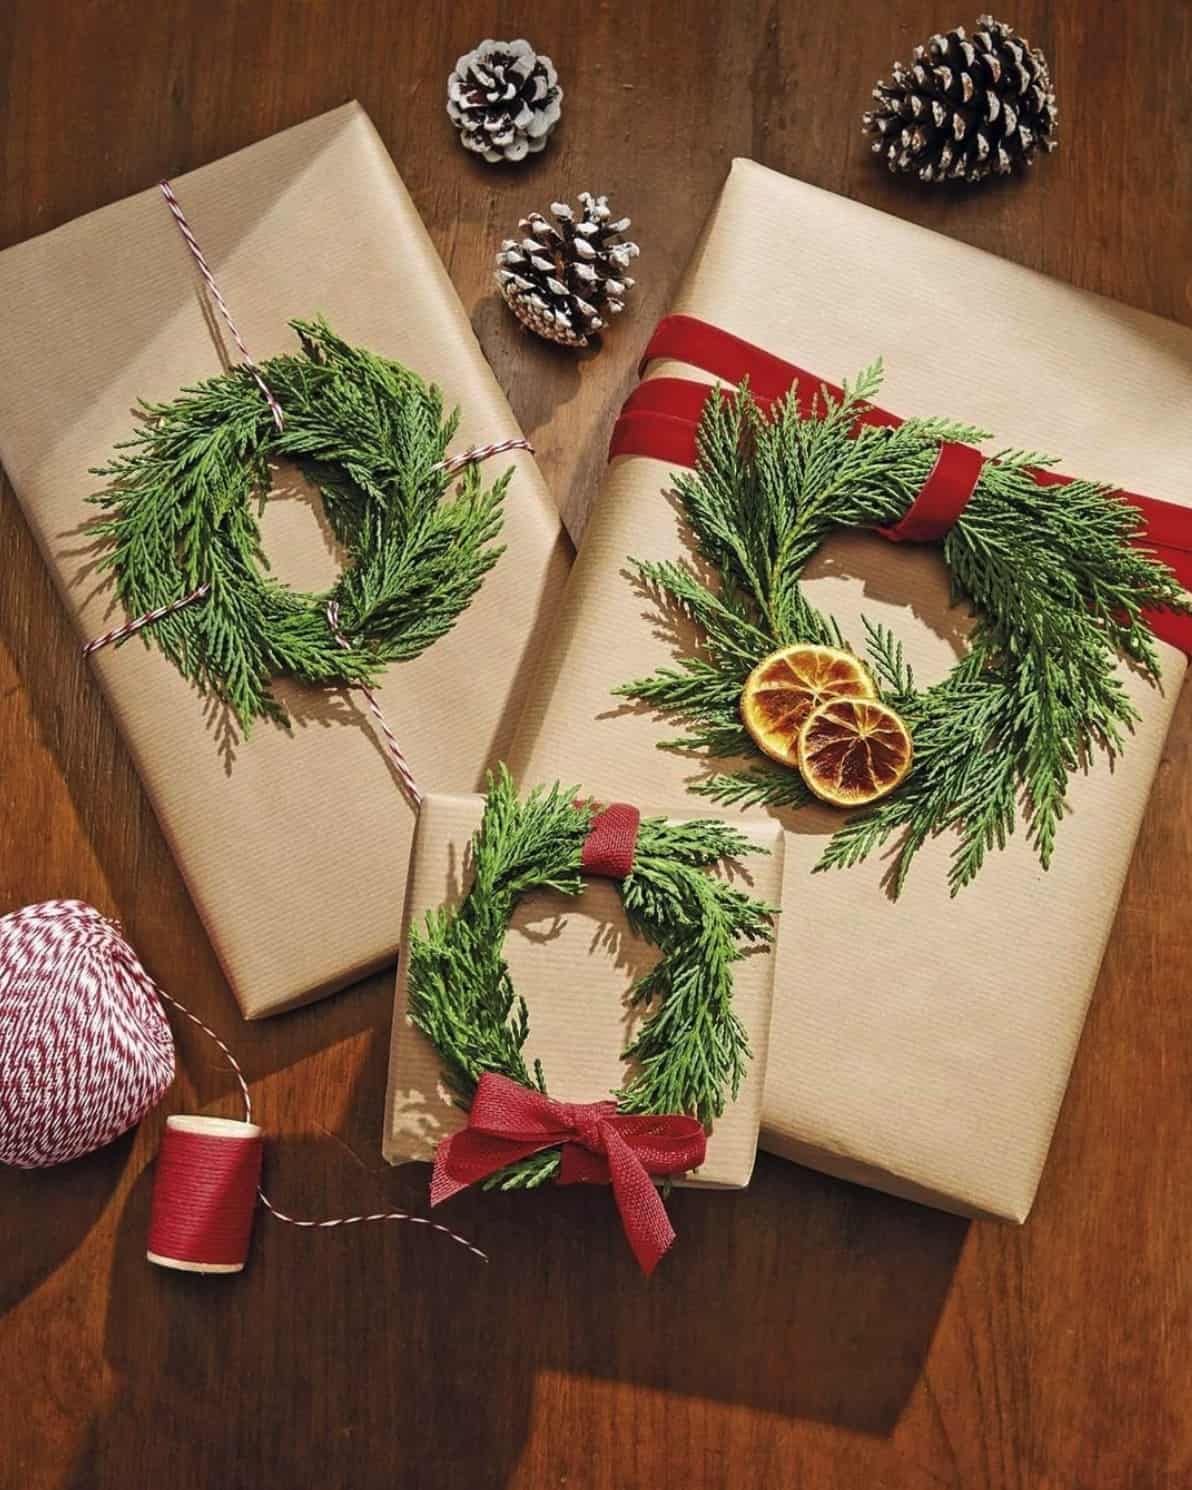 kraft-paper-wrapped-gifts-with-mini-wreaths